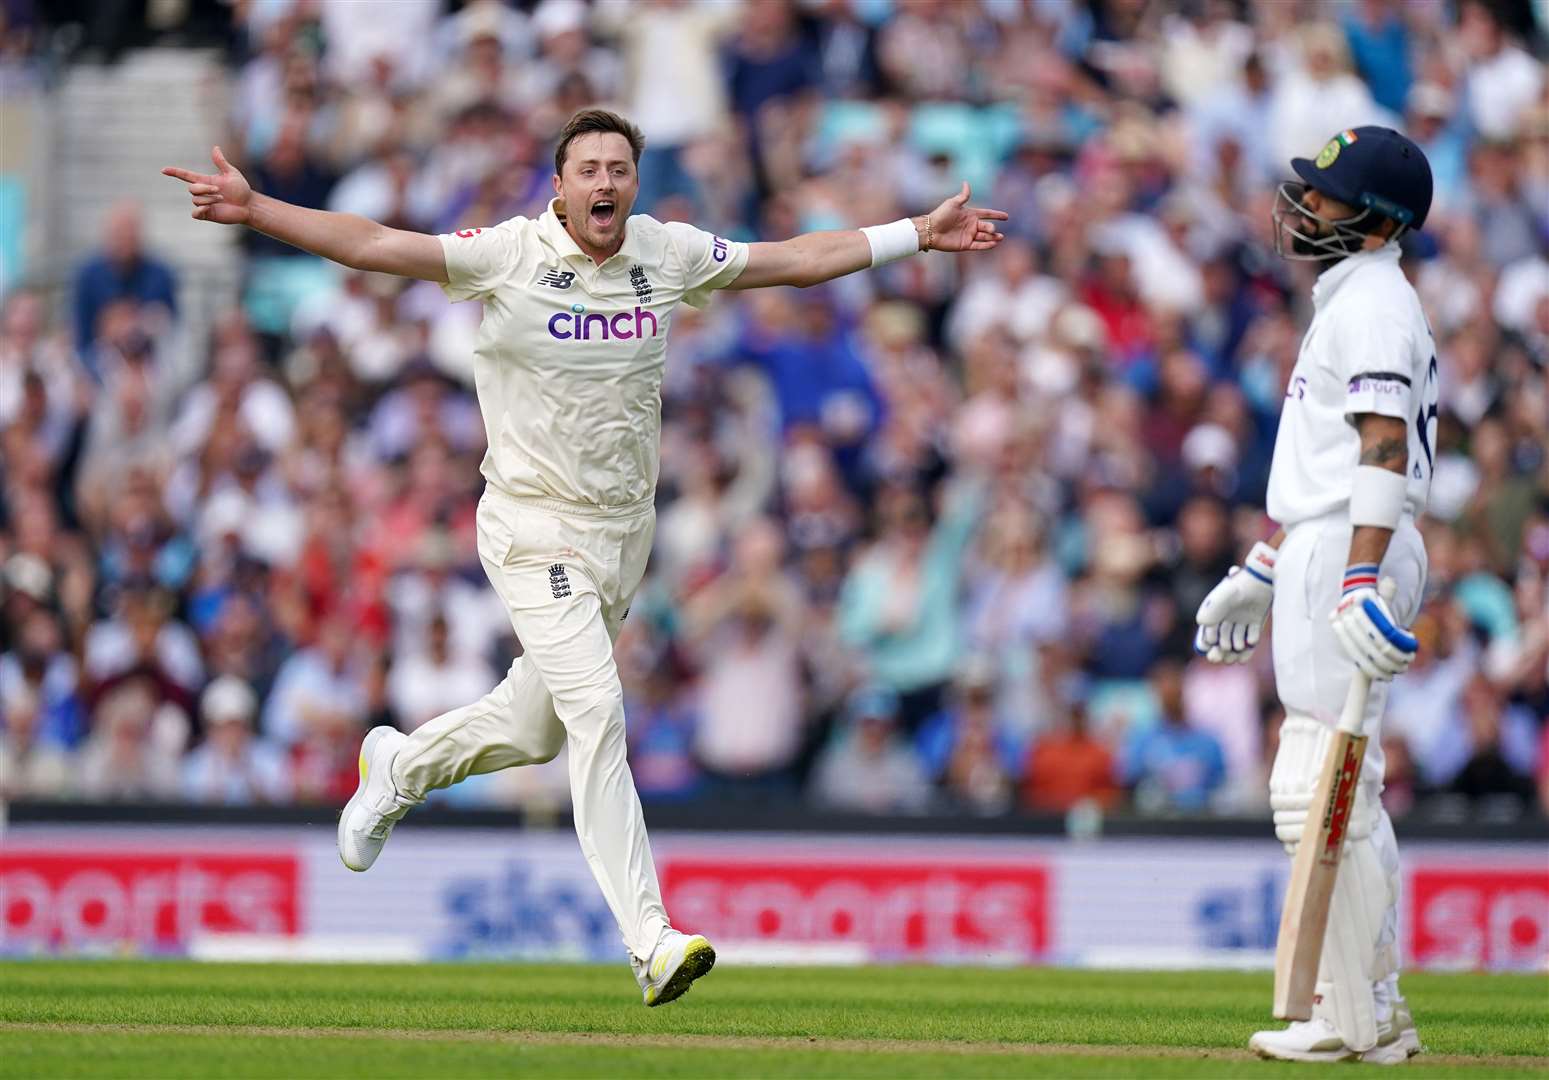 England's Ollie Robinson celebrates the wicket of India's Virat Kohli during day one of the Fourth Test at the Oval Picture: Adam Davy/PA Wire/PA Images